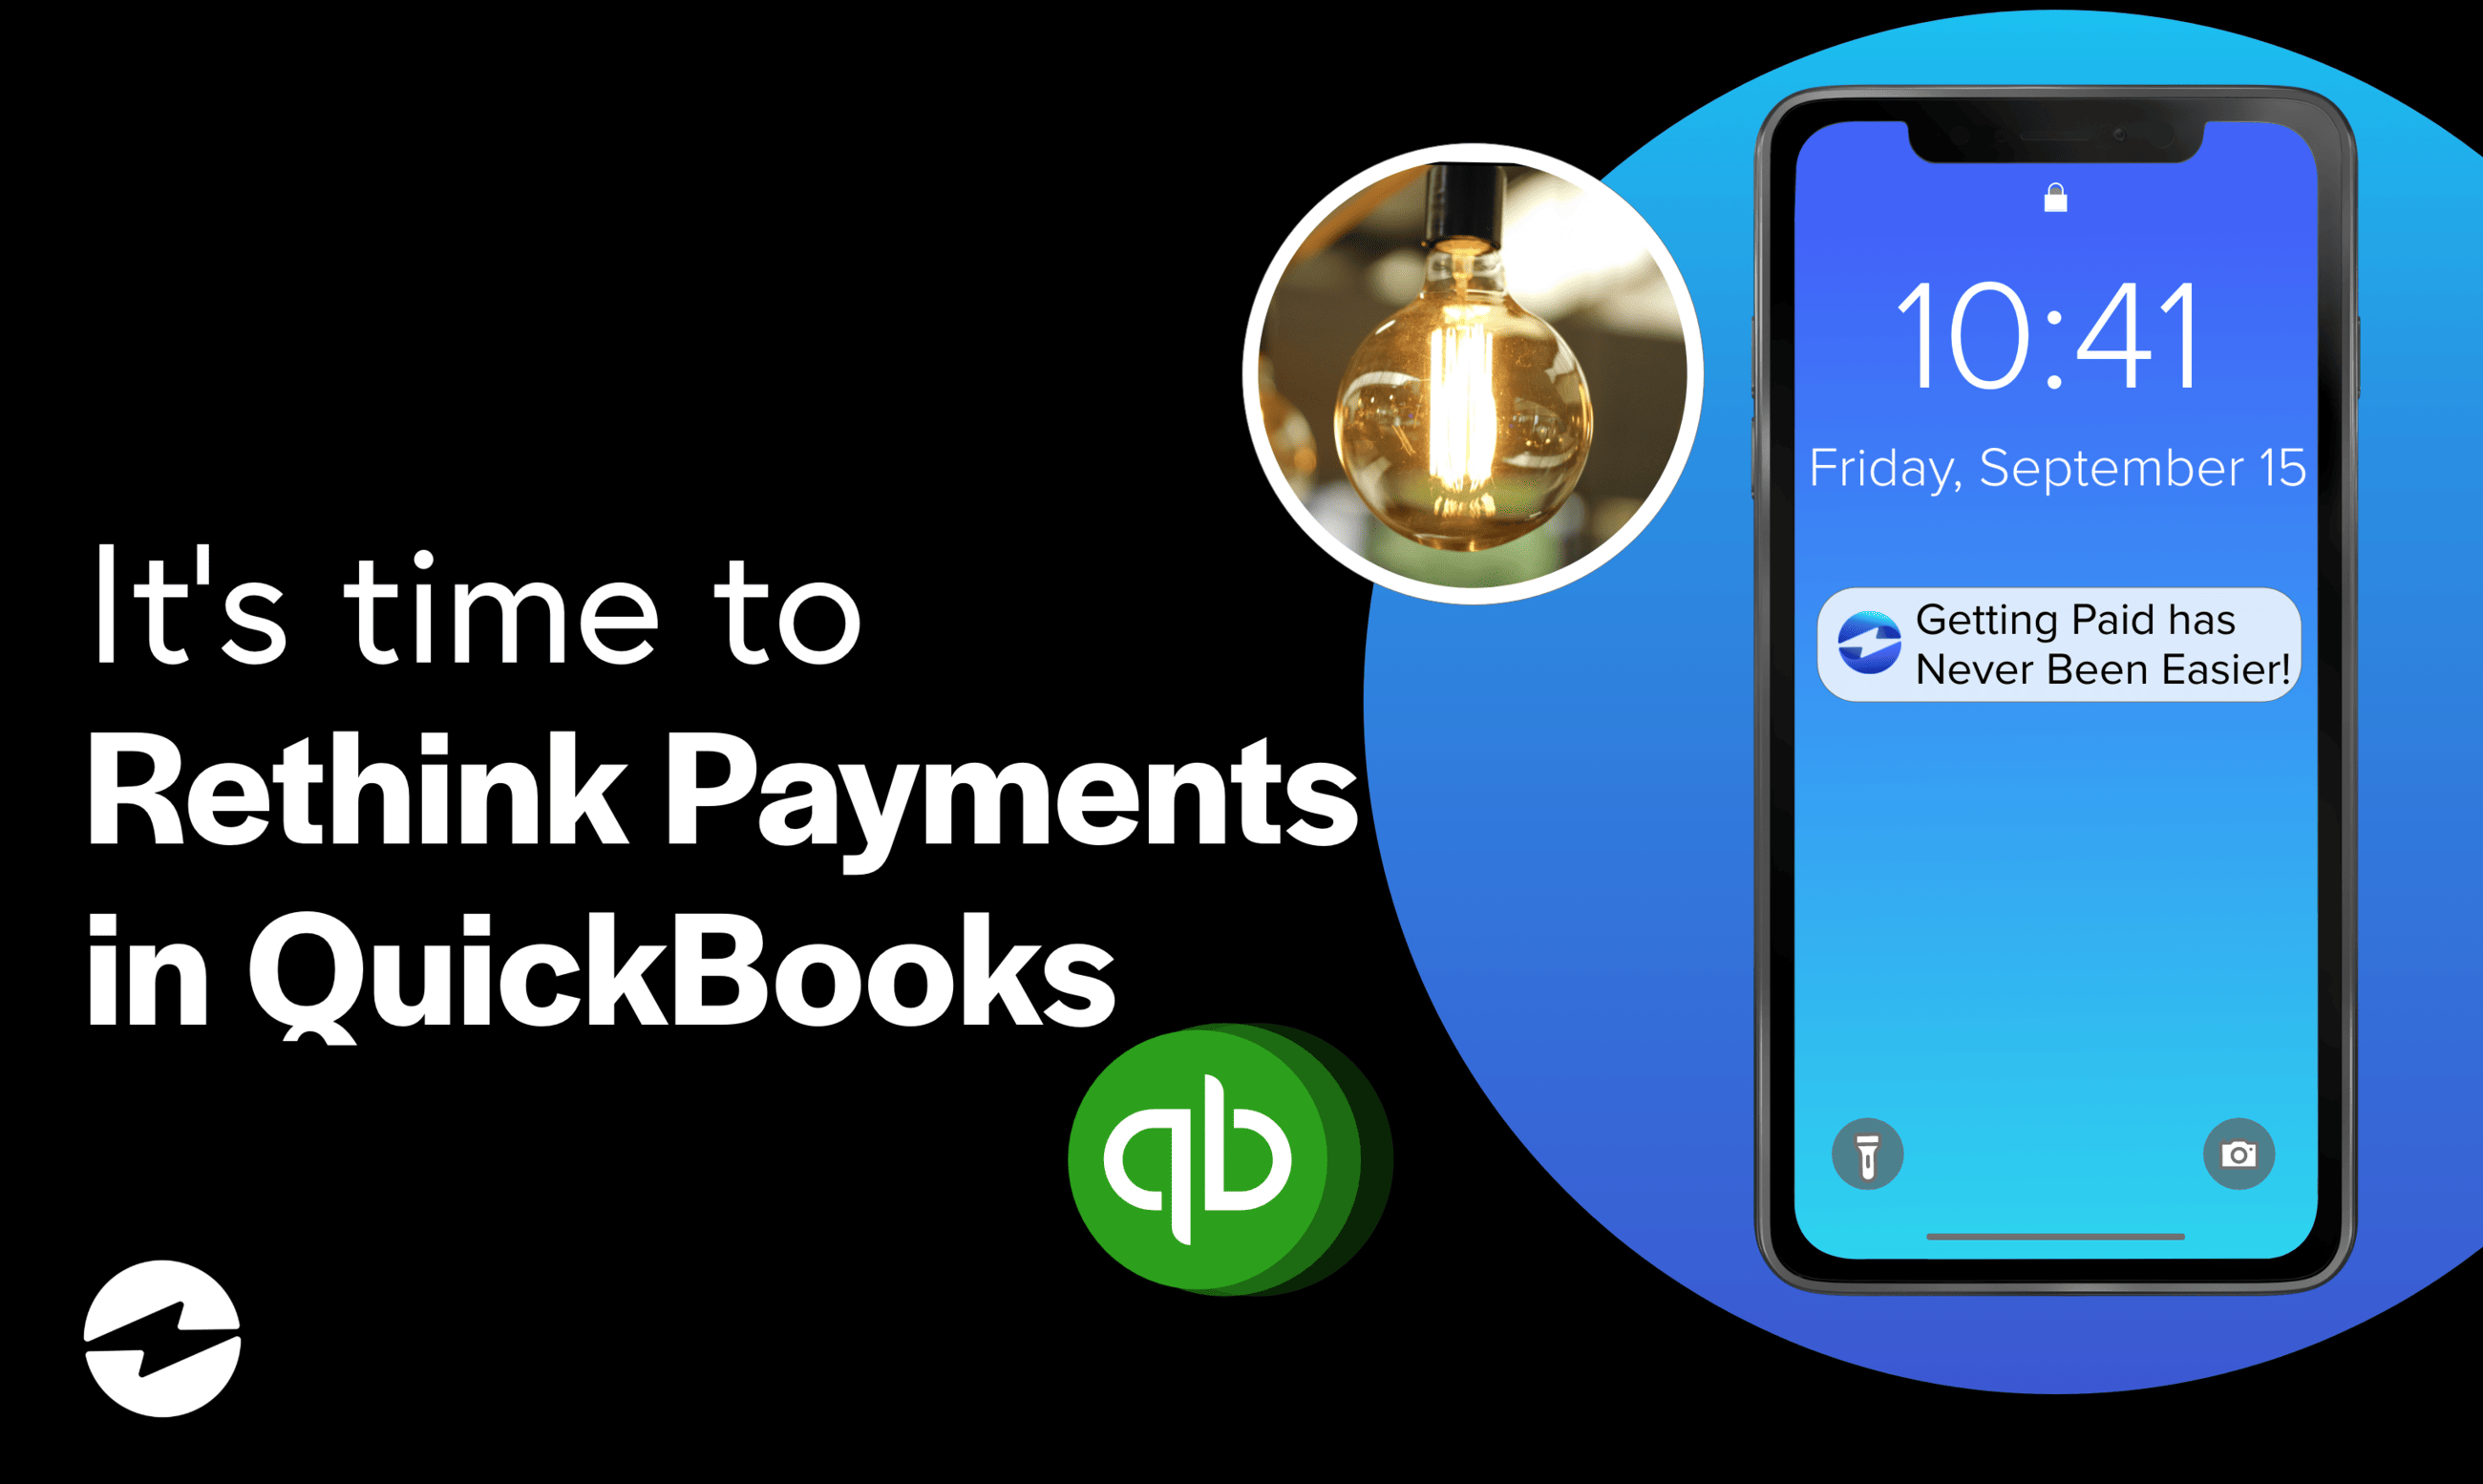 It's time to rethink payments in quickbooks